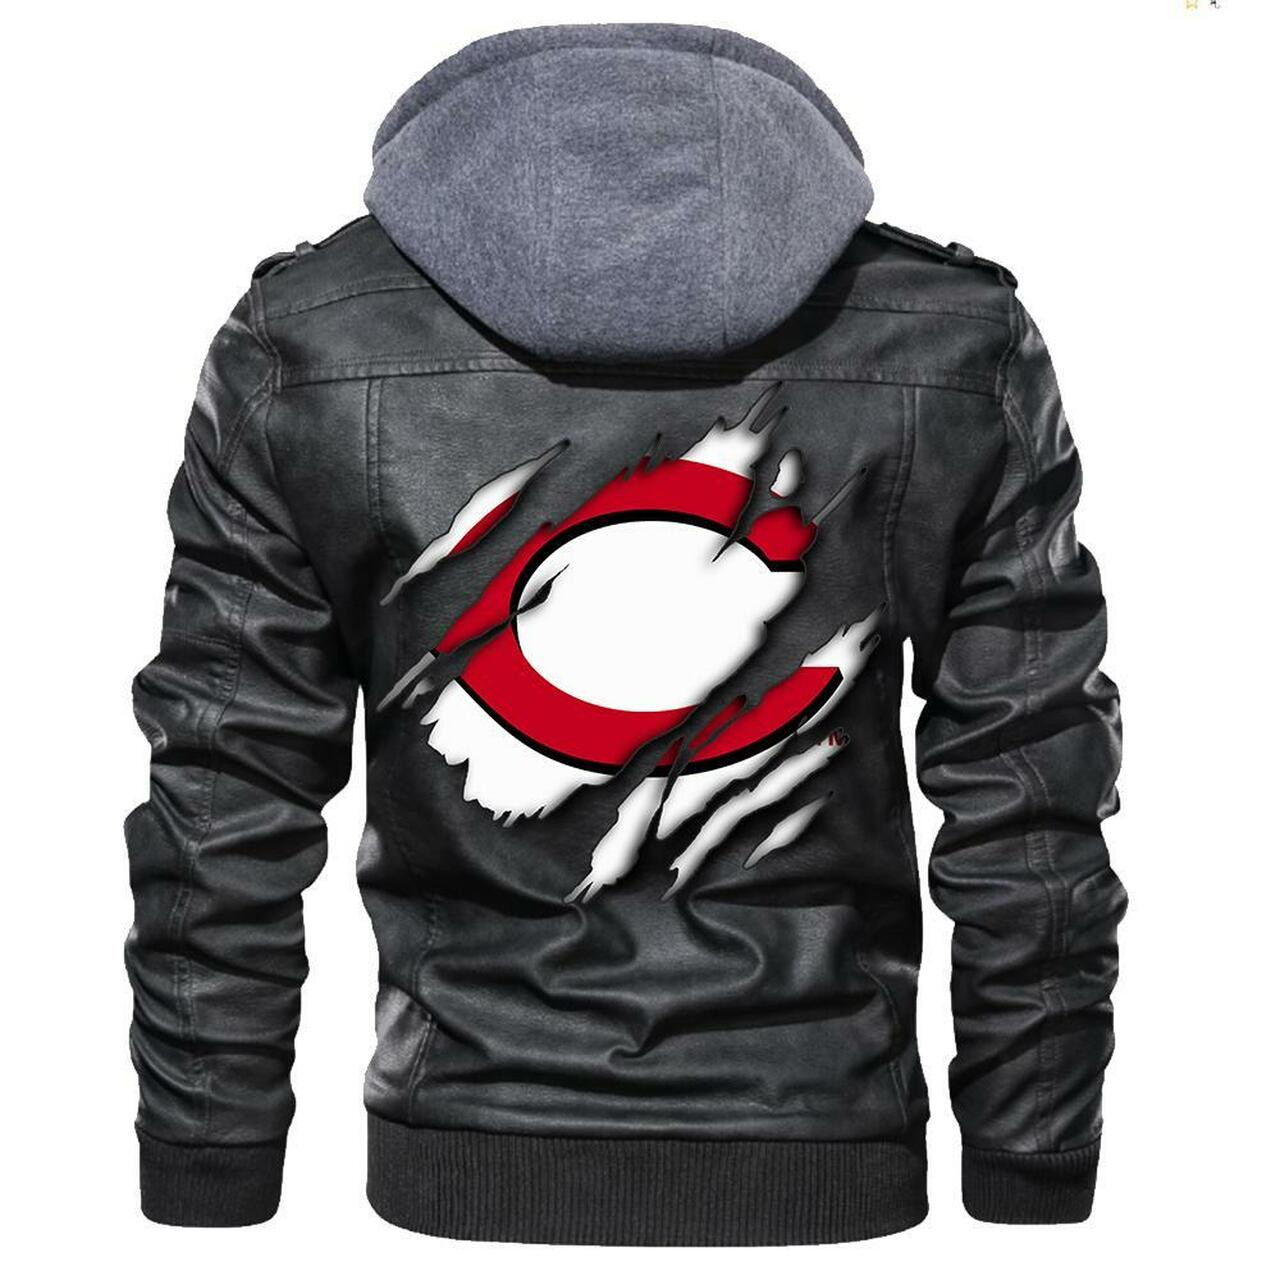 Top 200+ leather jacket so cool for your man 69